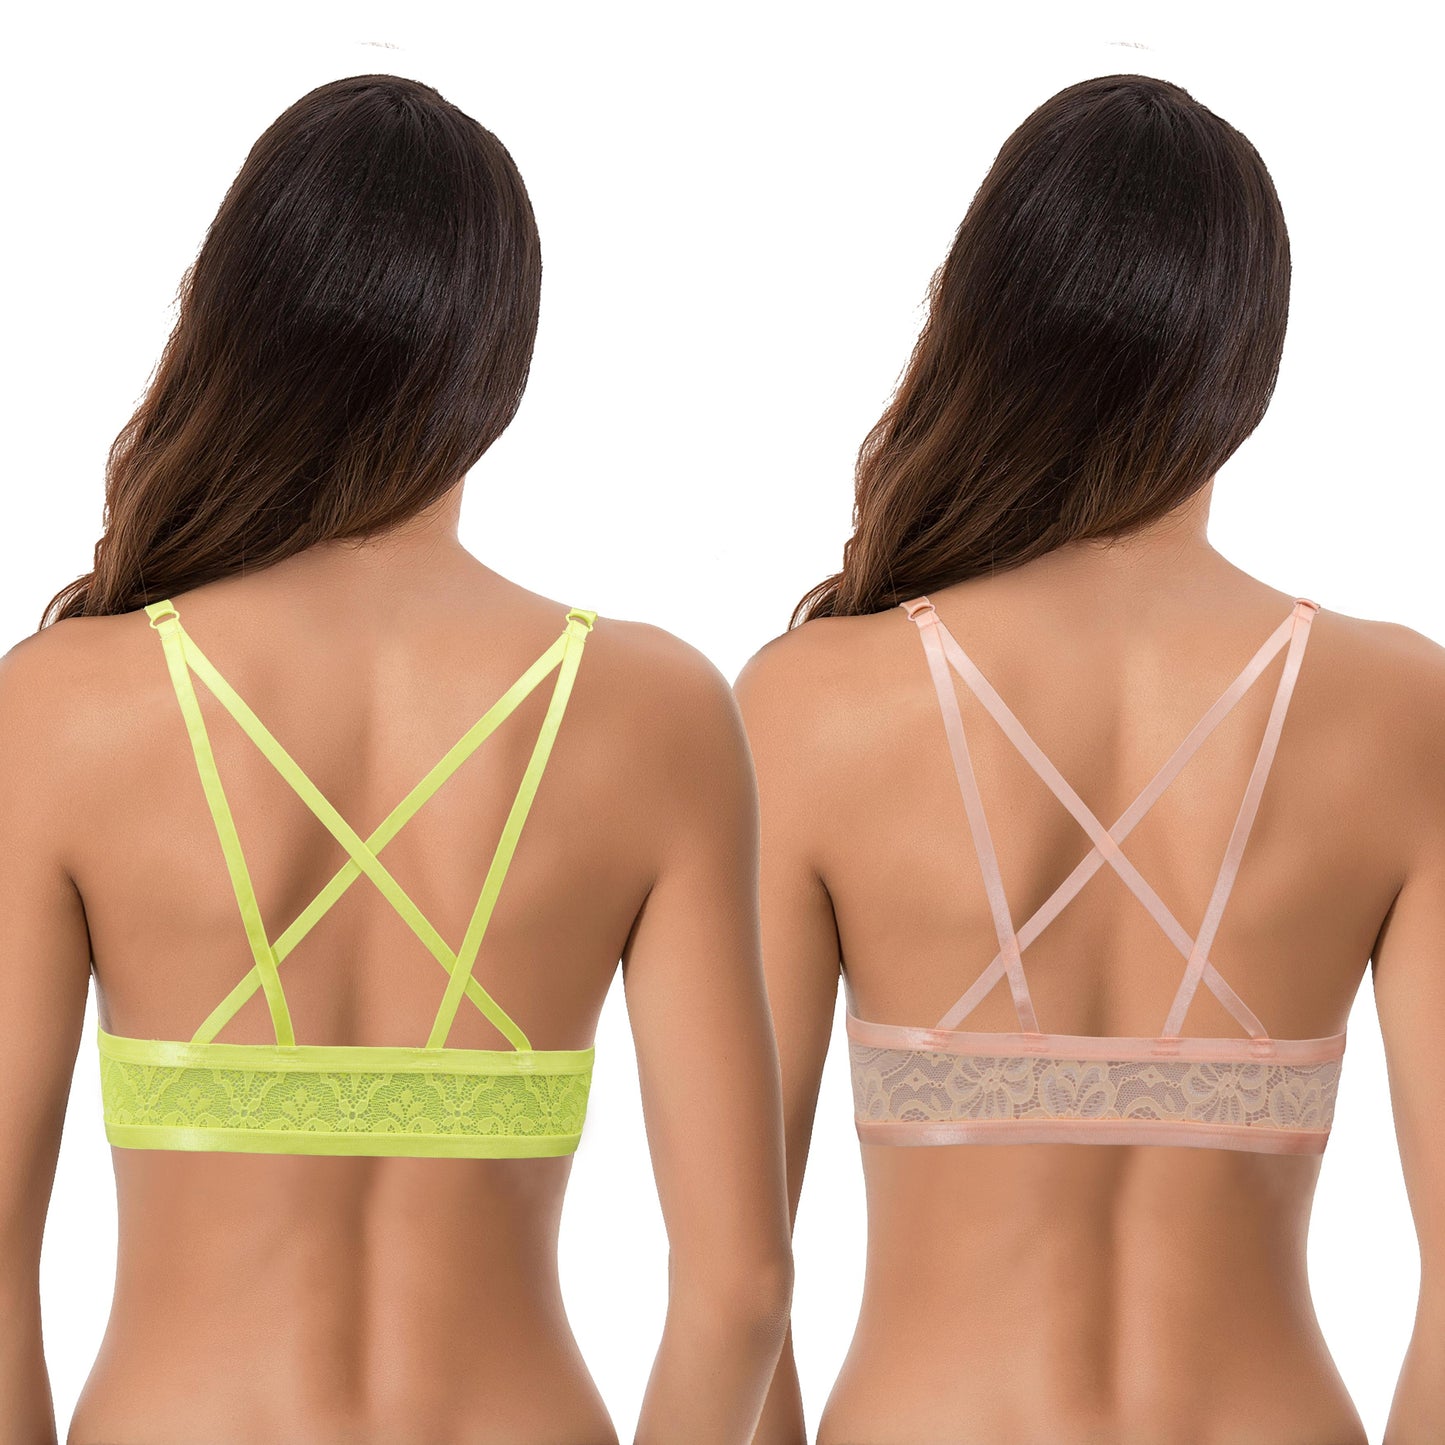 Womens Push Up Add 1 and a half Cup Underwire Halter Front Close Bras -2PK-Lime,Peach